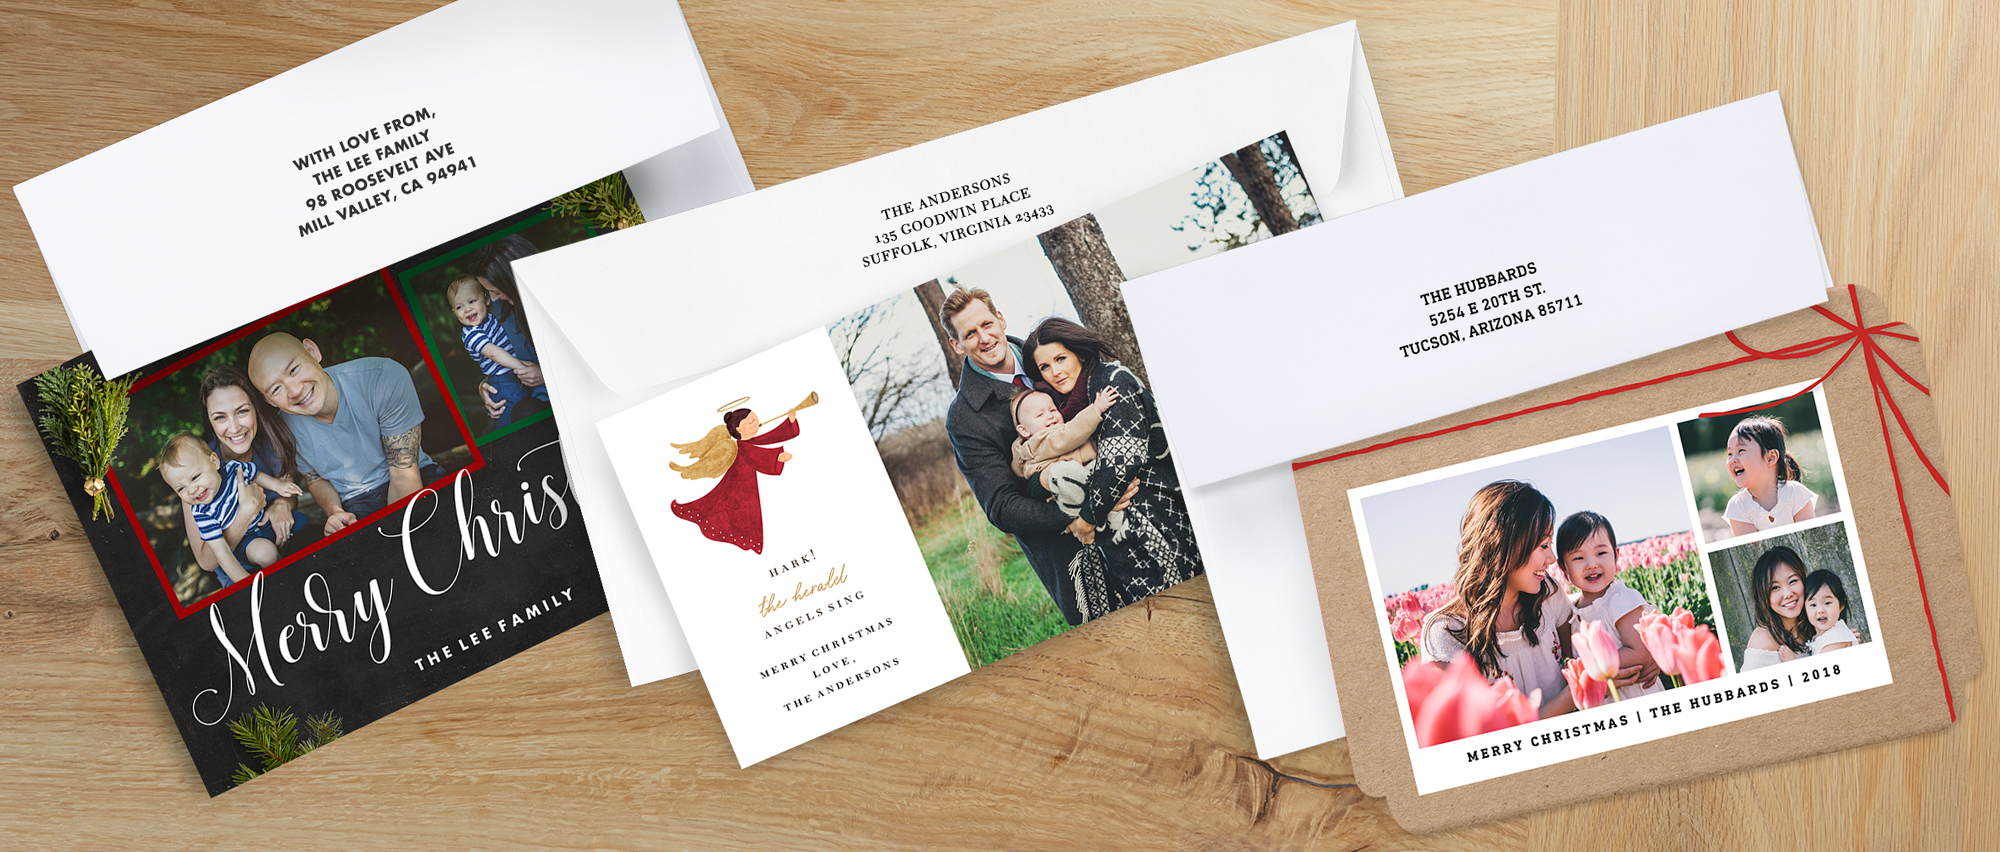 You can even add a holiday sentiment for extra flare Included at no additional charge when you upgrade your 5x7 stationery cards to premium cardstock